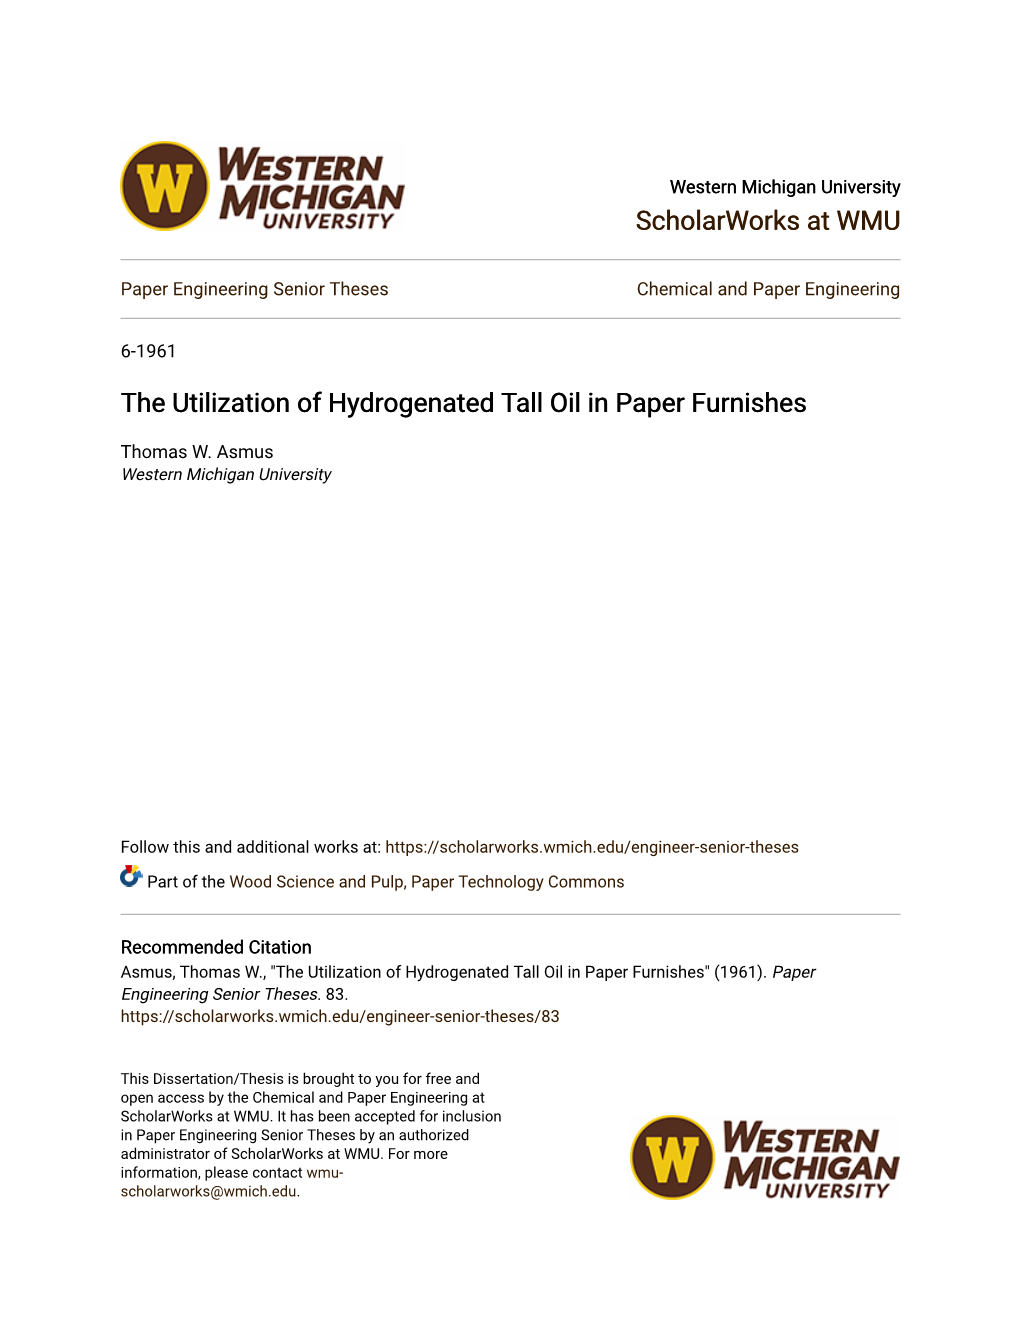 The Utilization of Hydrogenated Tall Oil in Paper Furnishes